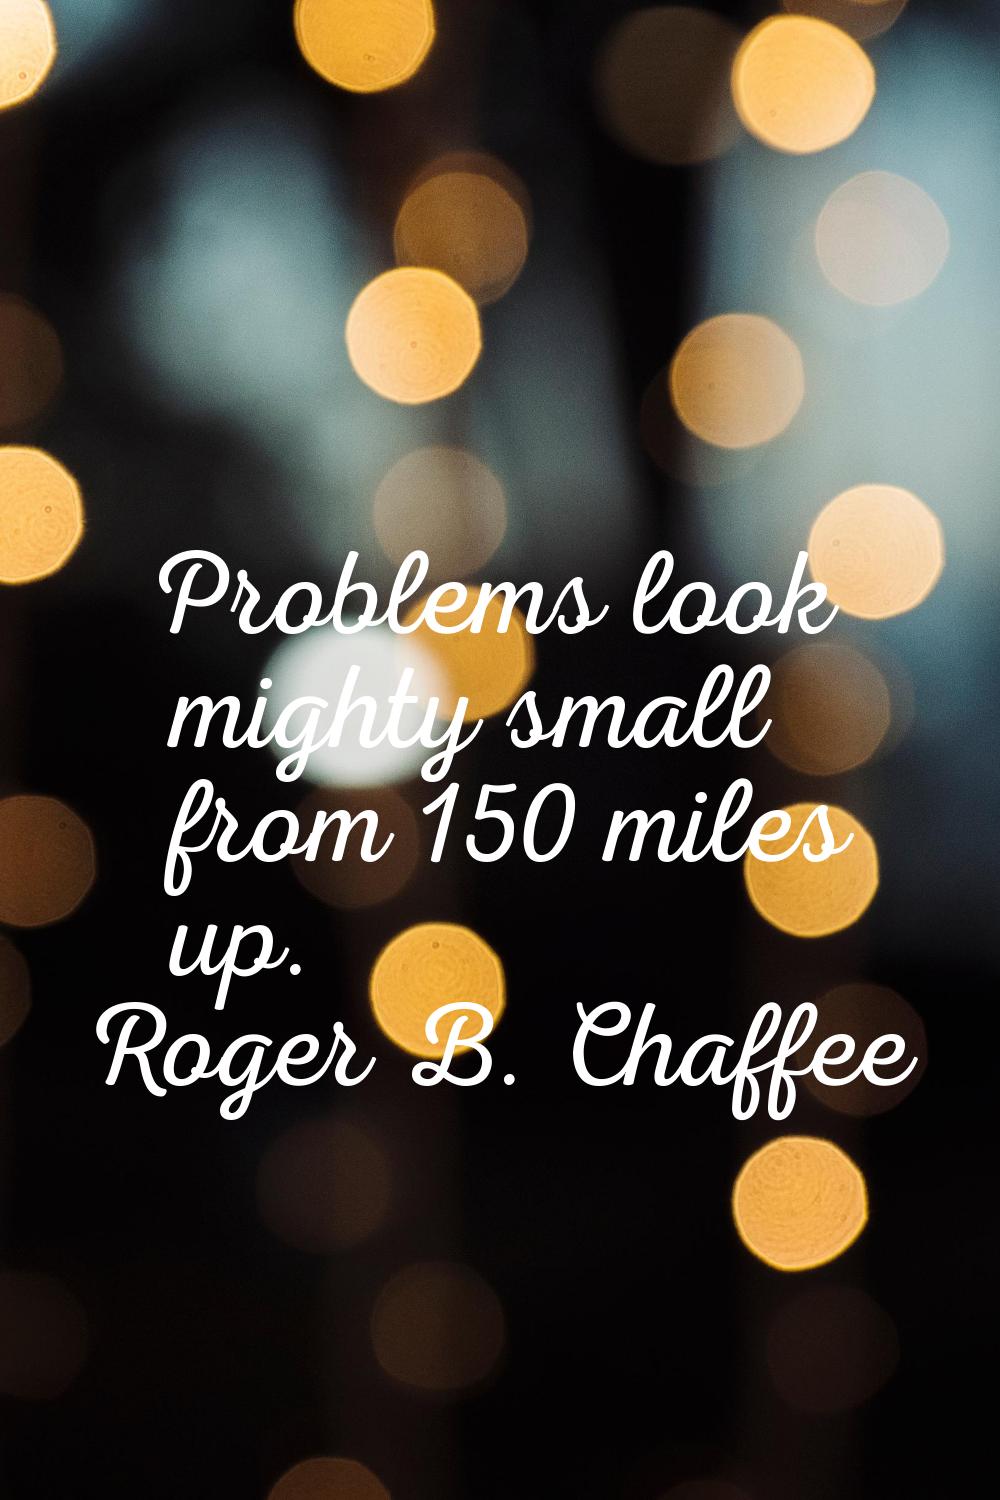 Problems look mighty small from 150 miles up.